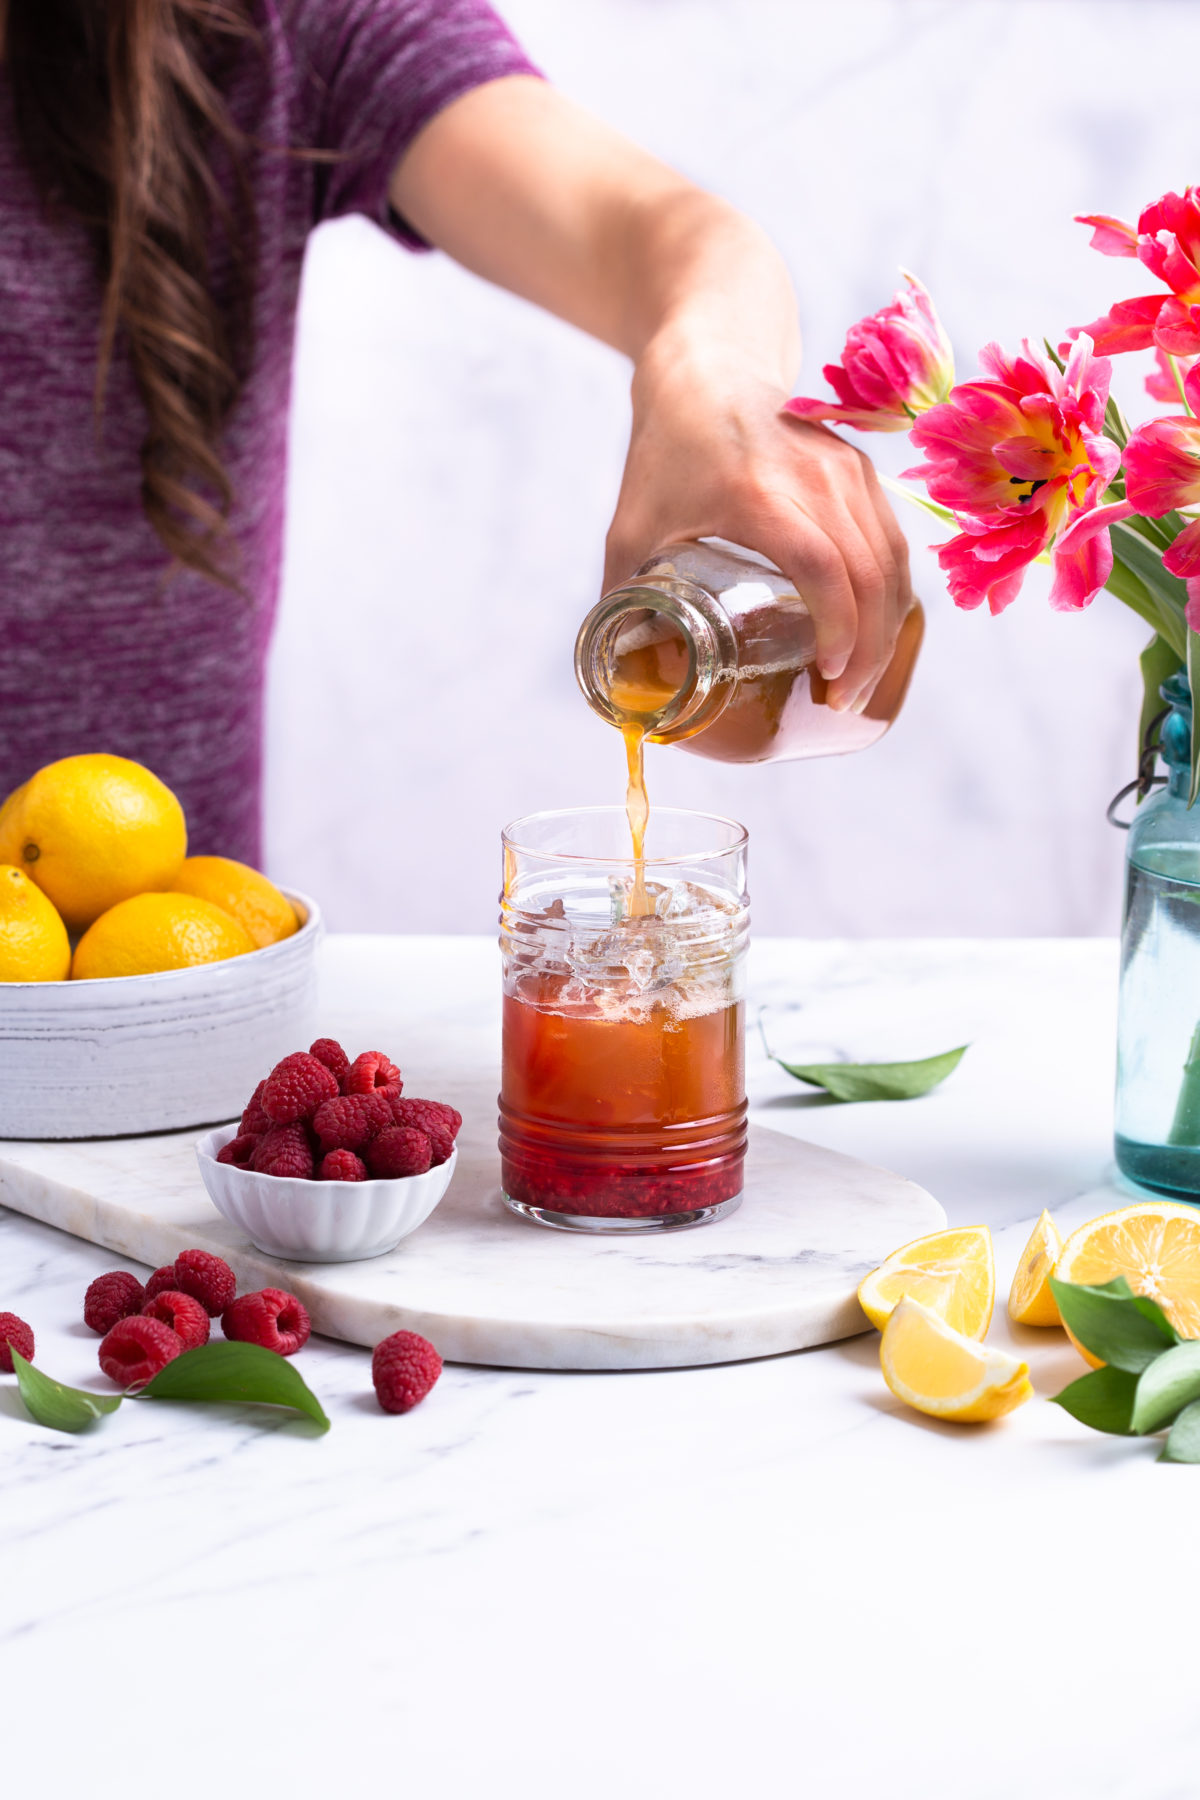 A woman's hand pouring Raspberry lemon-mint iced tea made with Botanica sweetened lion's mane iced tea with a bowl of lemons and a small ramekin of fresh raspberries and on a marble countertop